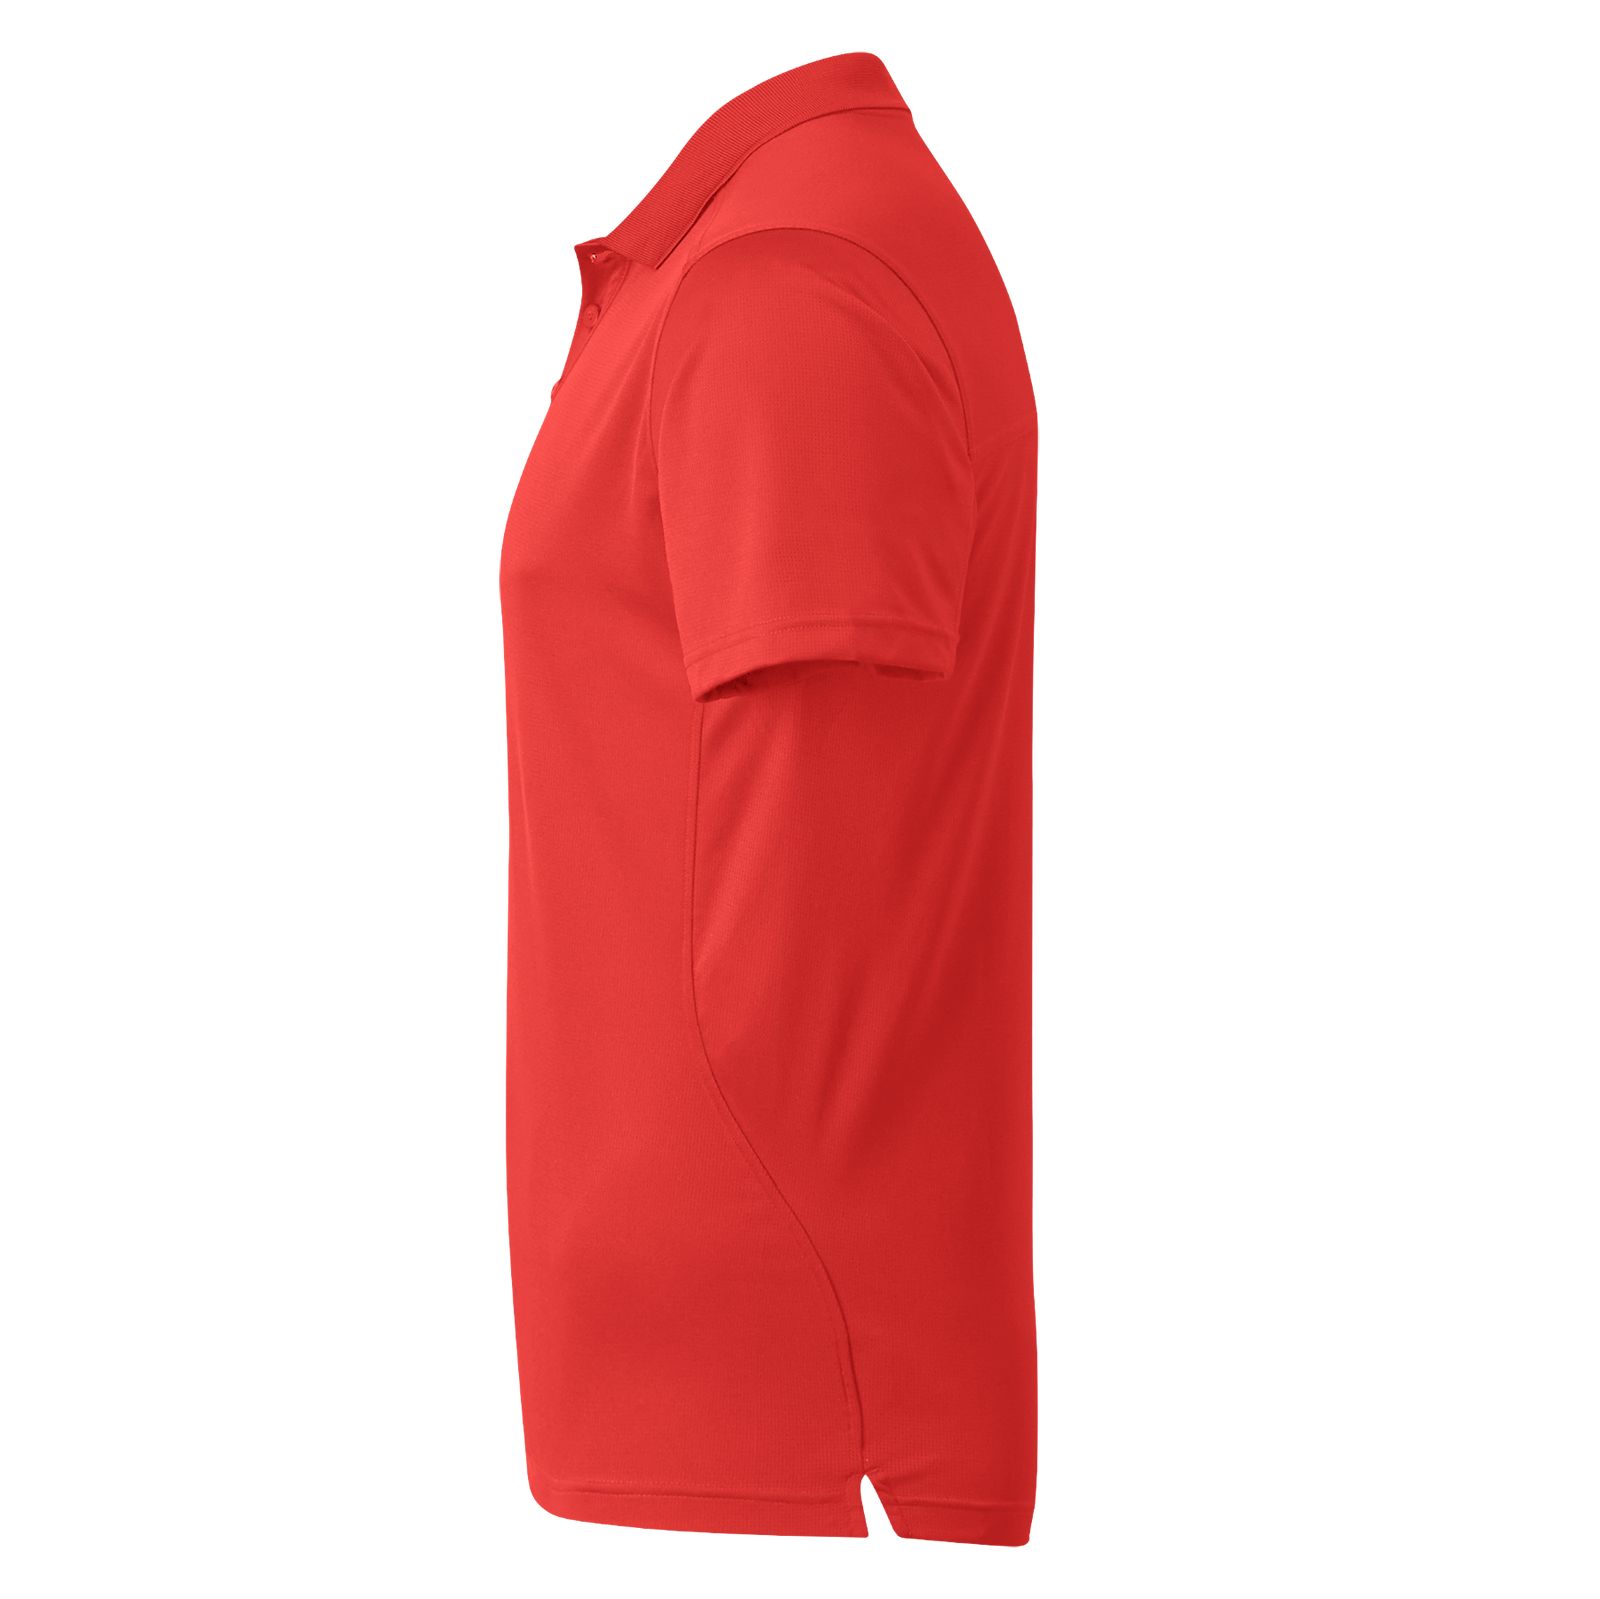 Men's Performance Tech Polo, Team Red image number 1